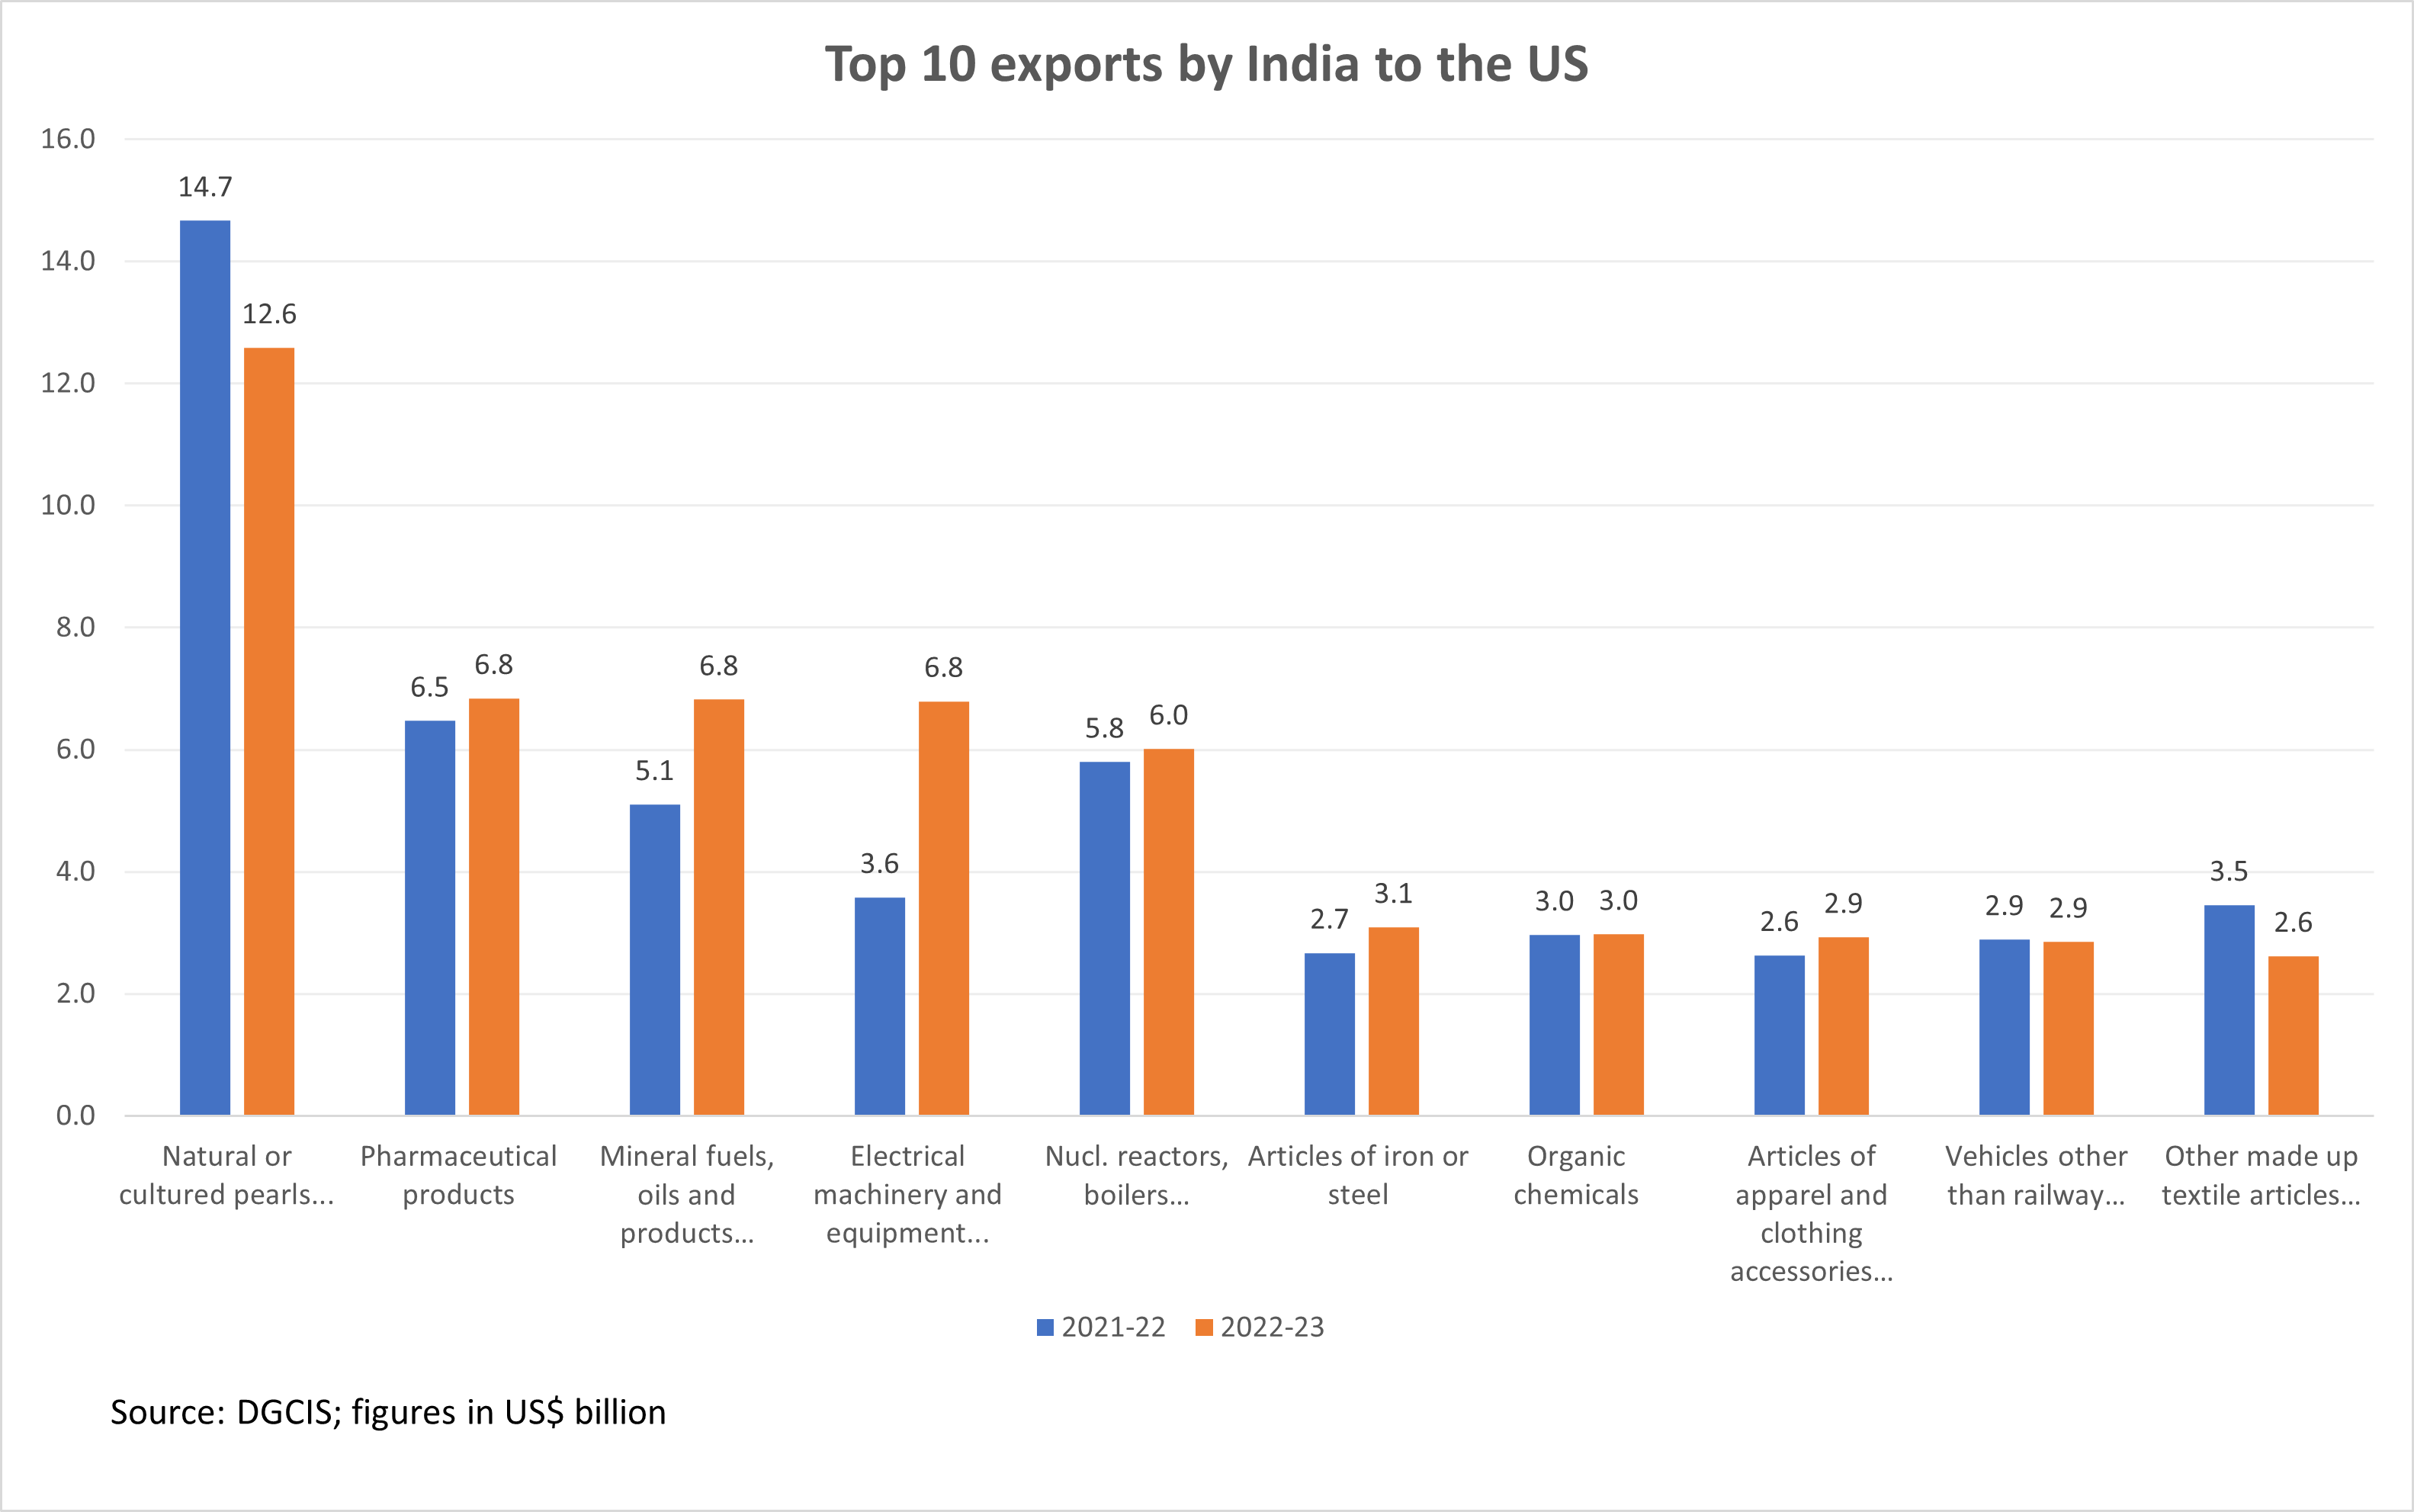 India's top 10 exports to the US